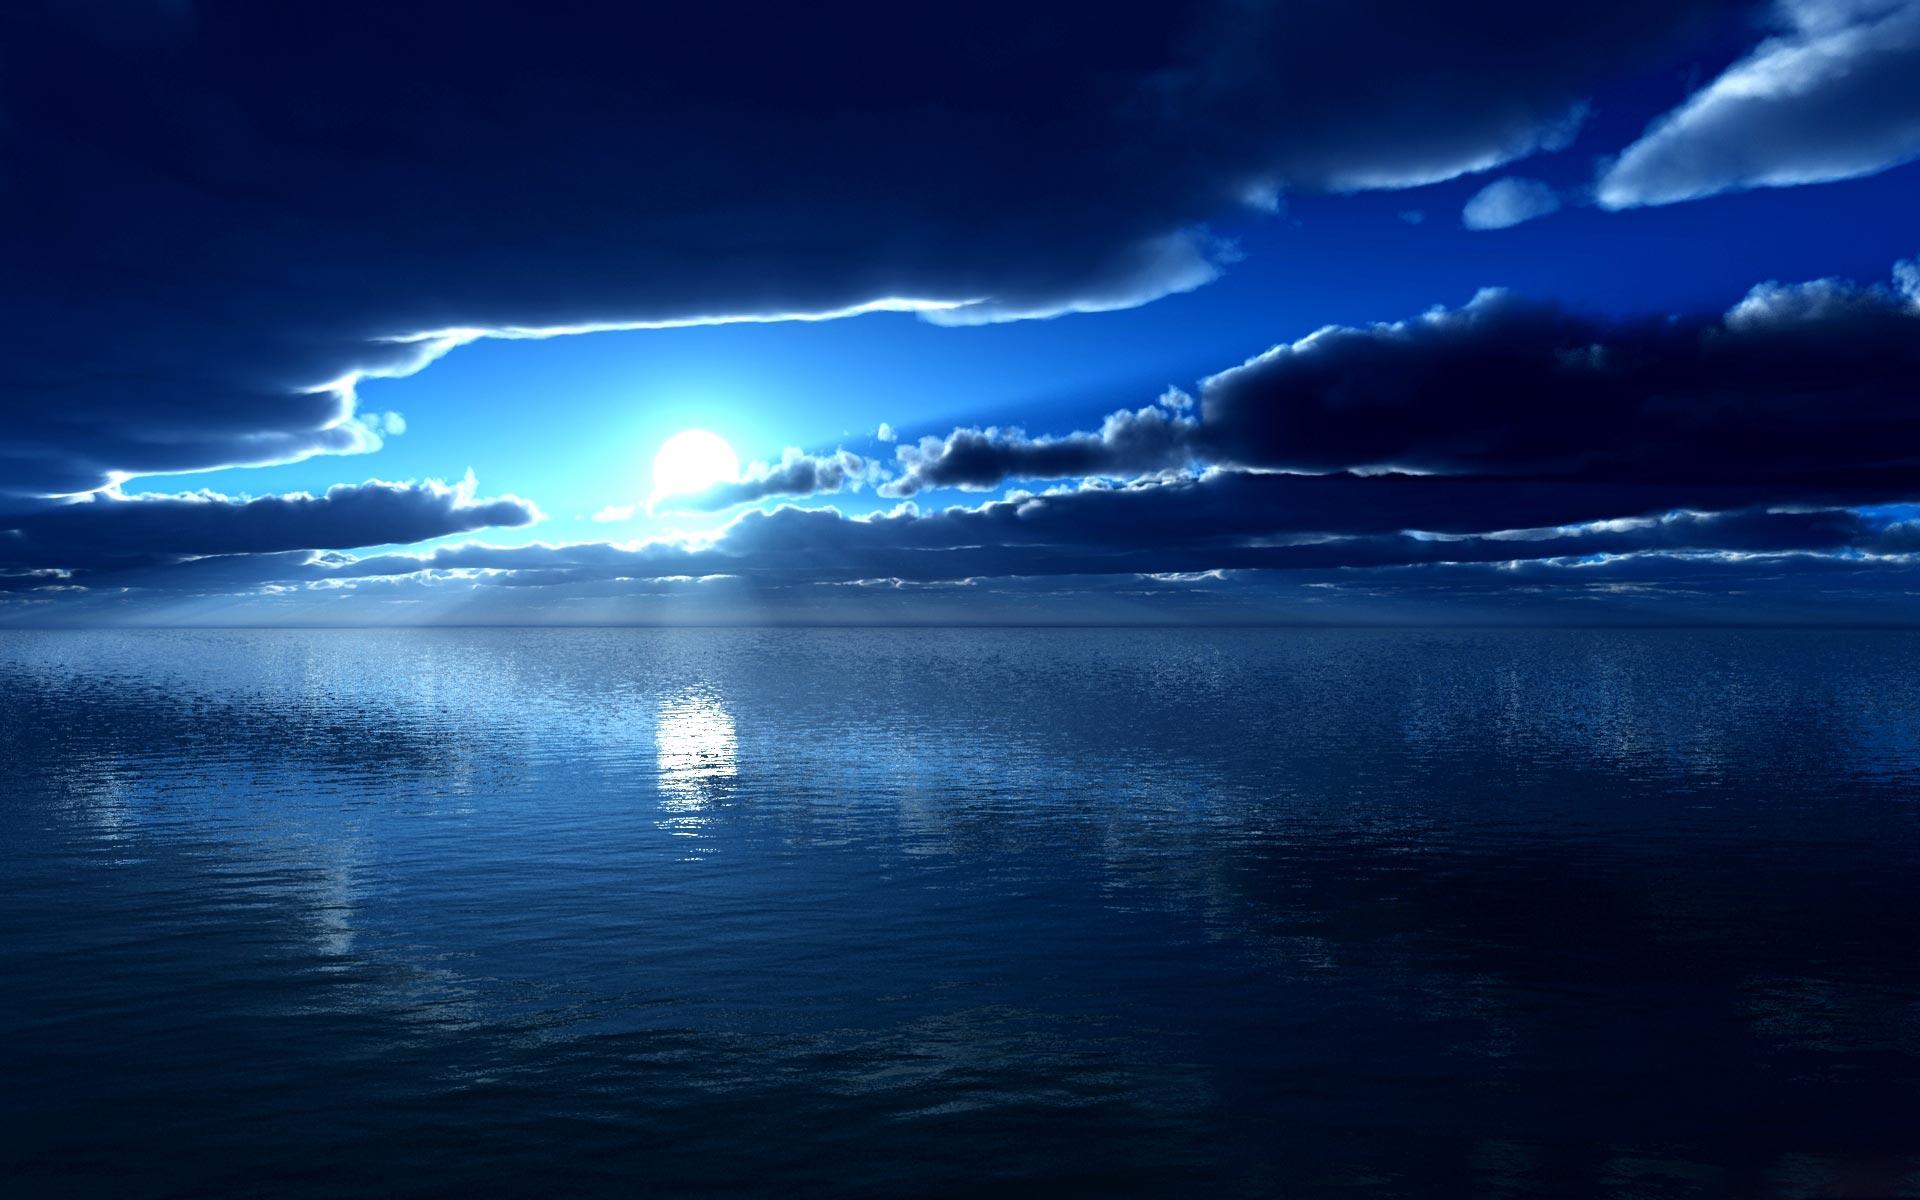 Sky and River relax desktop background HD Wallpaper. High